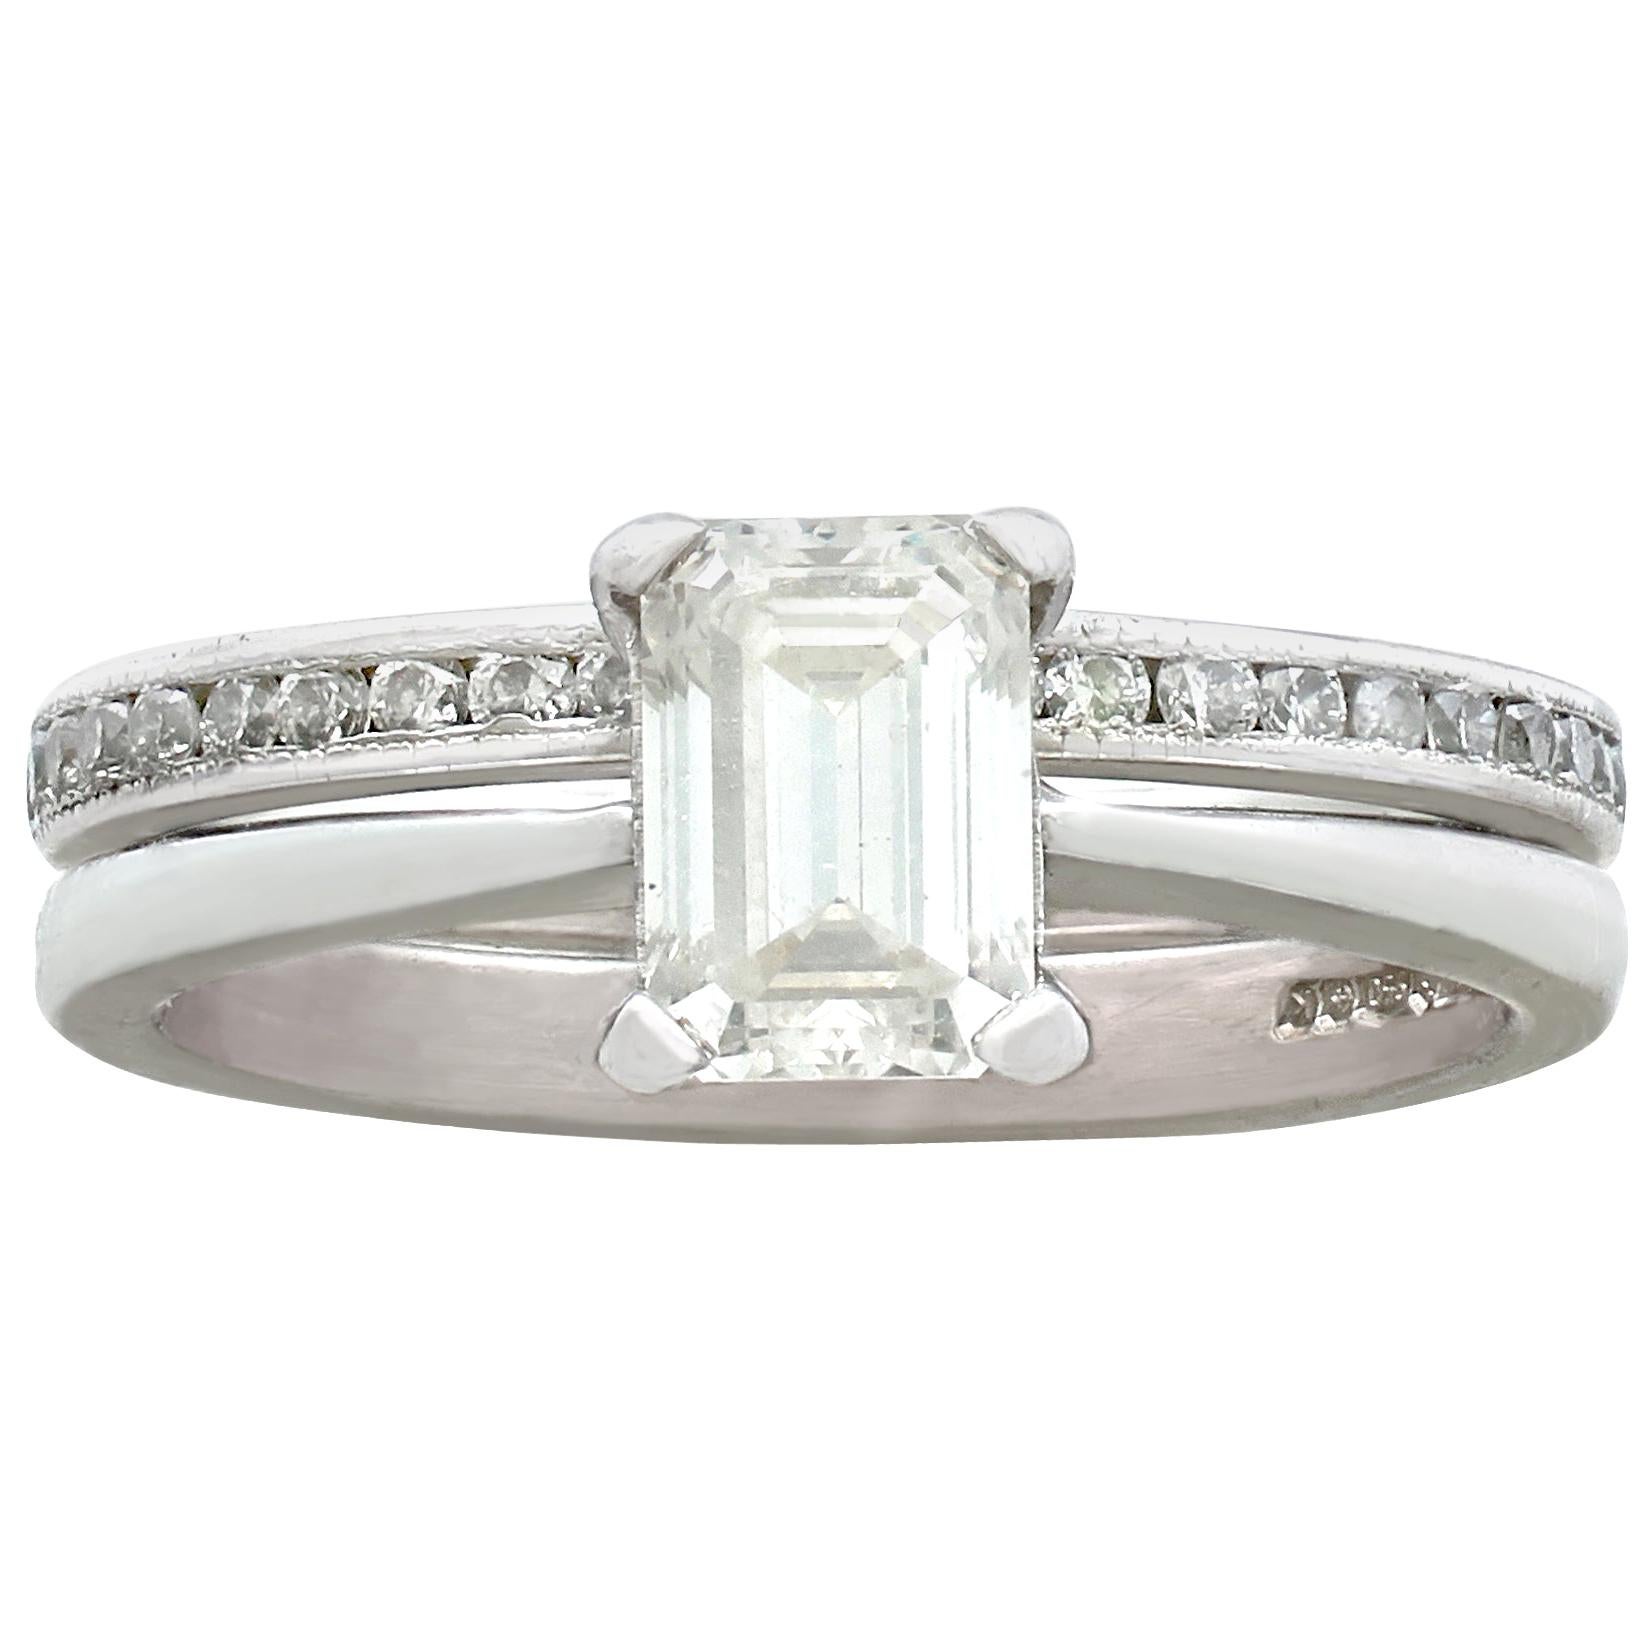 1.02 Carat Diamond and Platinum Solitaire and Half-Eternity Ring